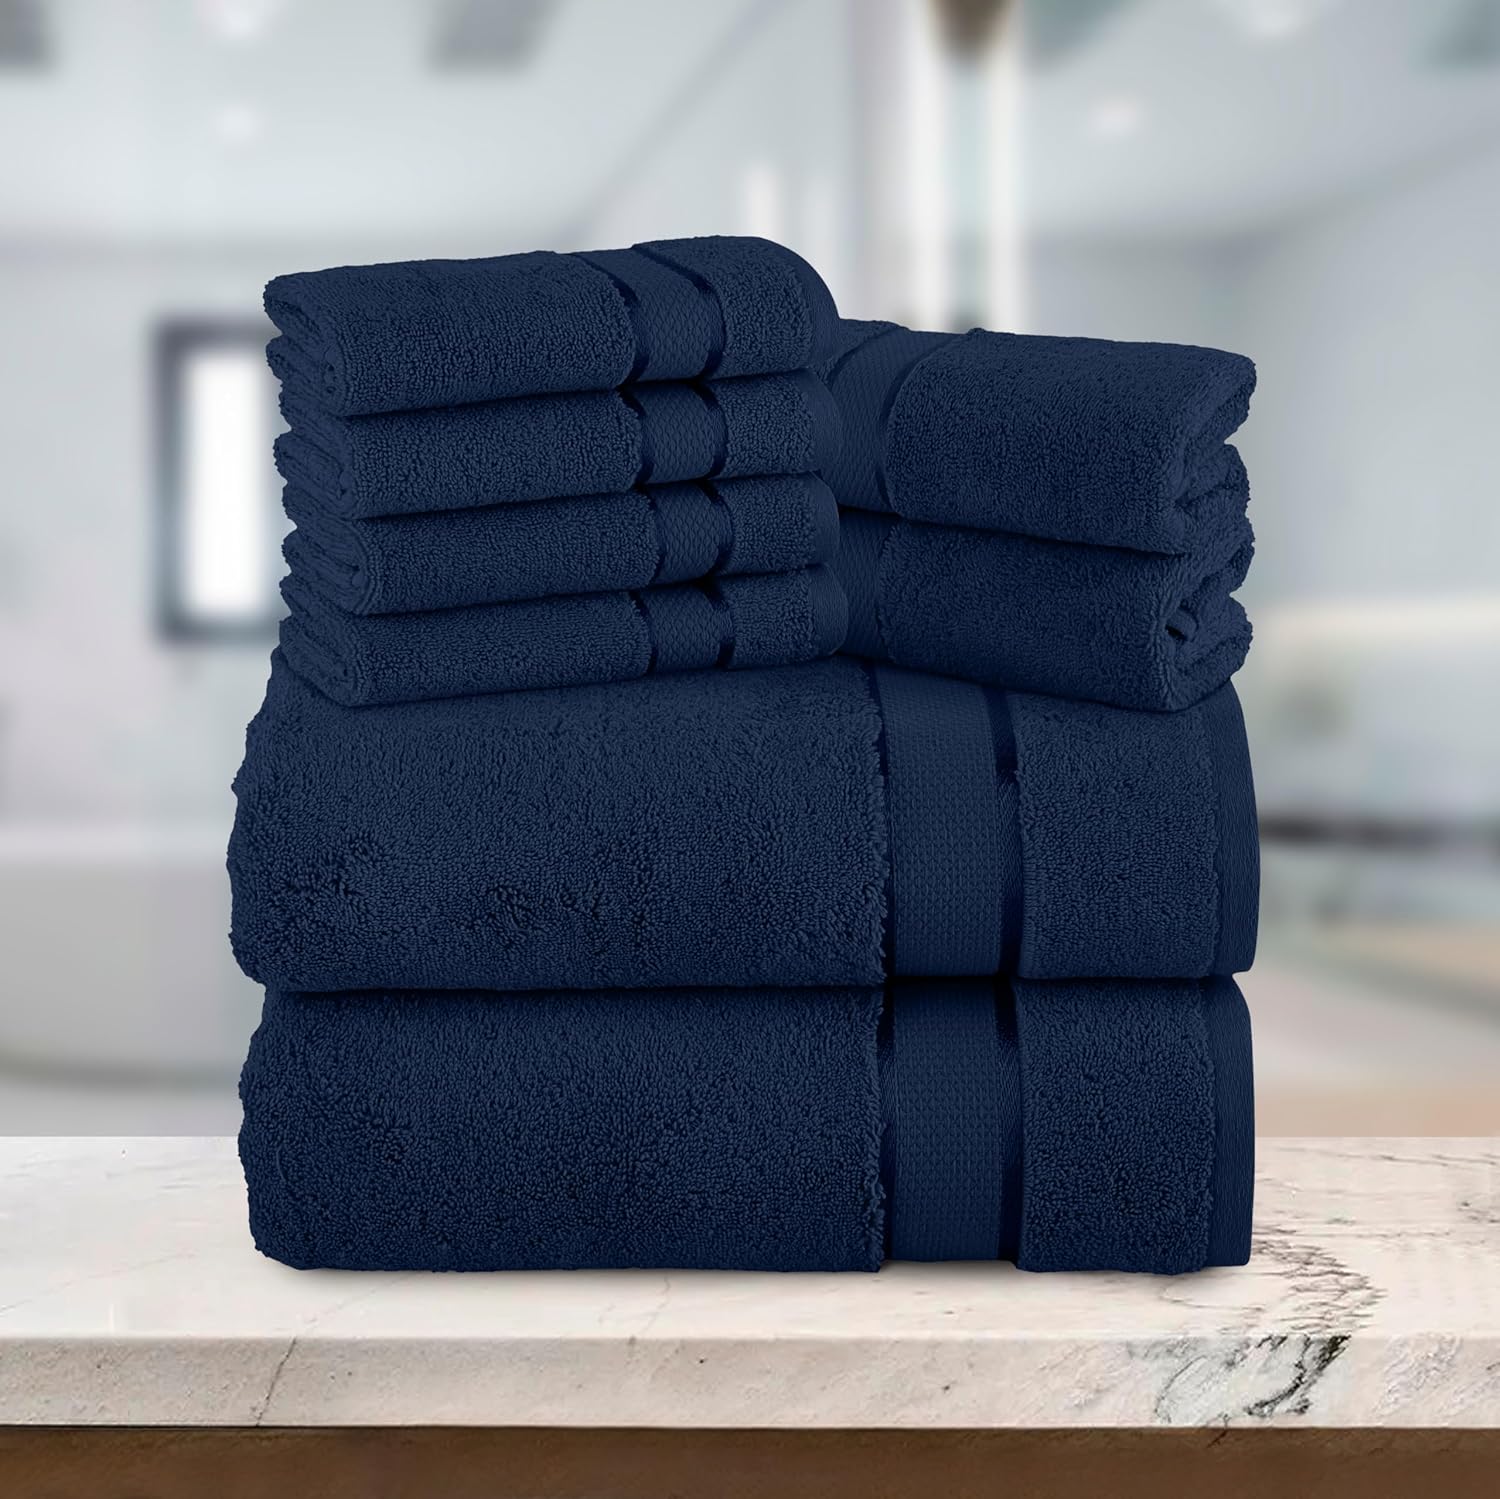 Home Labels 8 Pack Bath Towel Set Navy Blue for Kitchen and Bath - Premium 600 GSM 100% Ring-Spun Cotton 2 Bath Towels, 2 Hand Towels & 4 Washcloths - Quick Dry - Highly Absorbent - Perfect for Daily Use